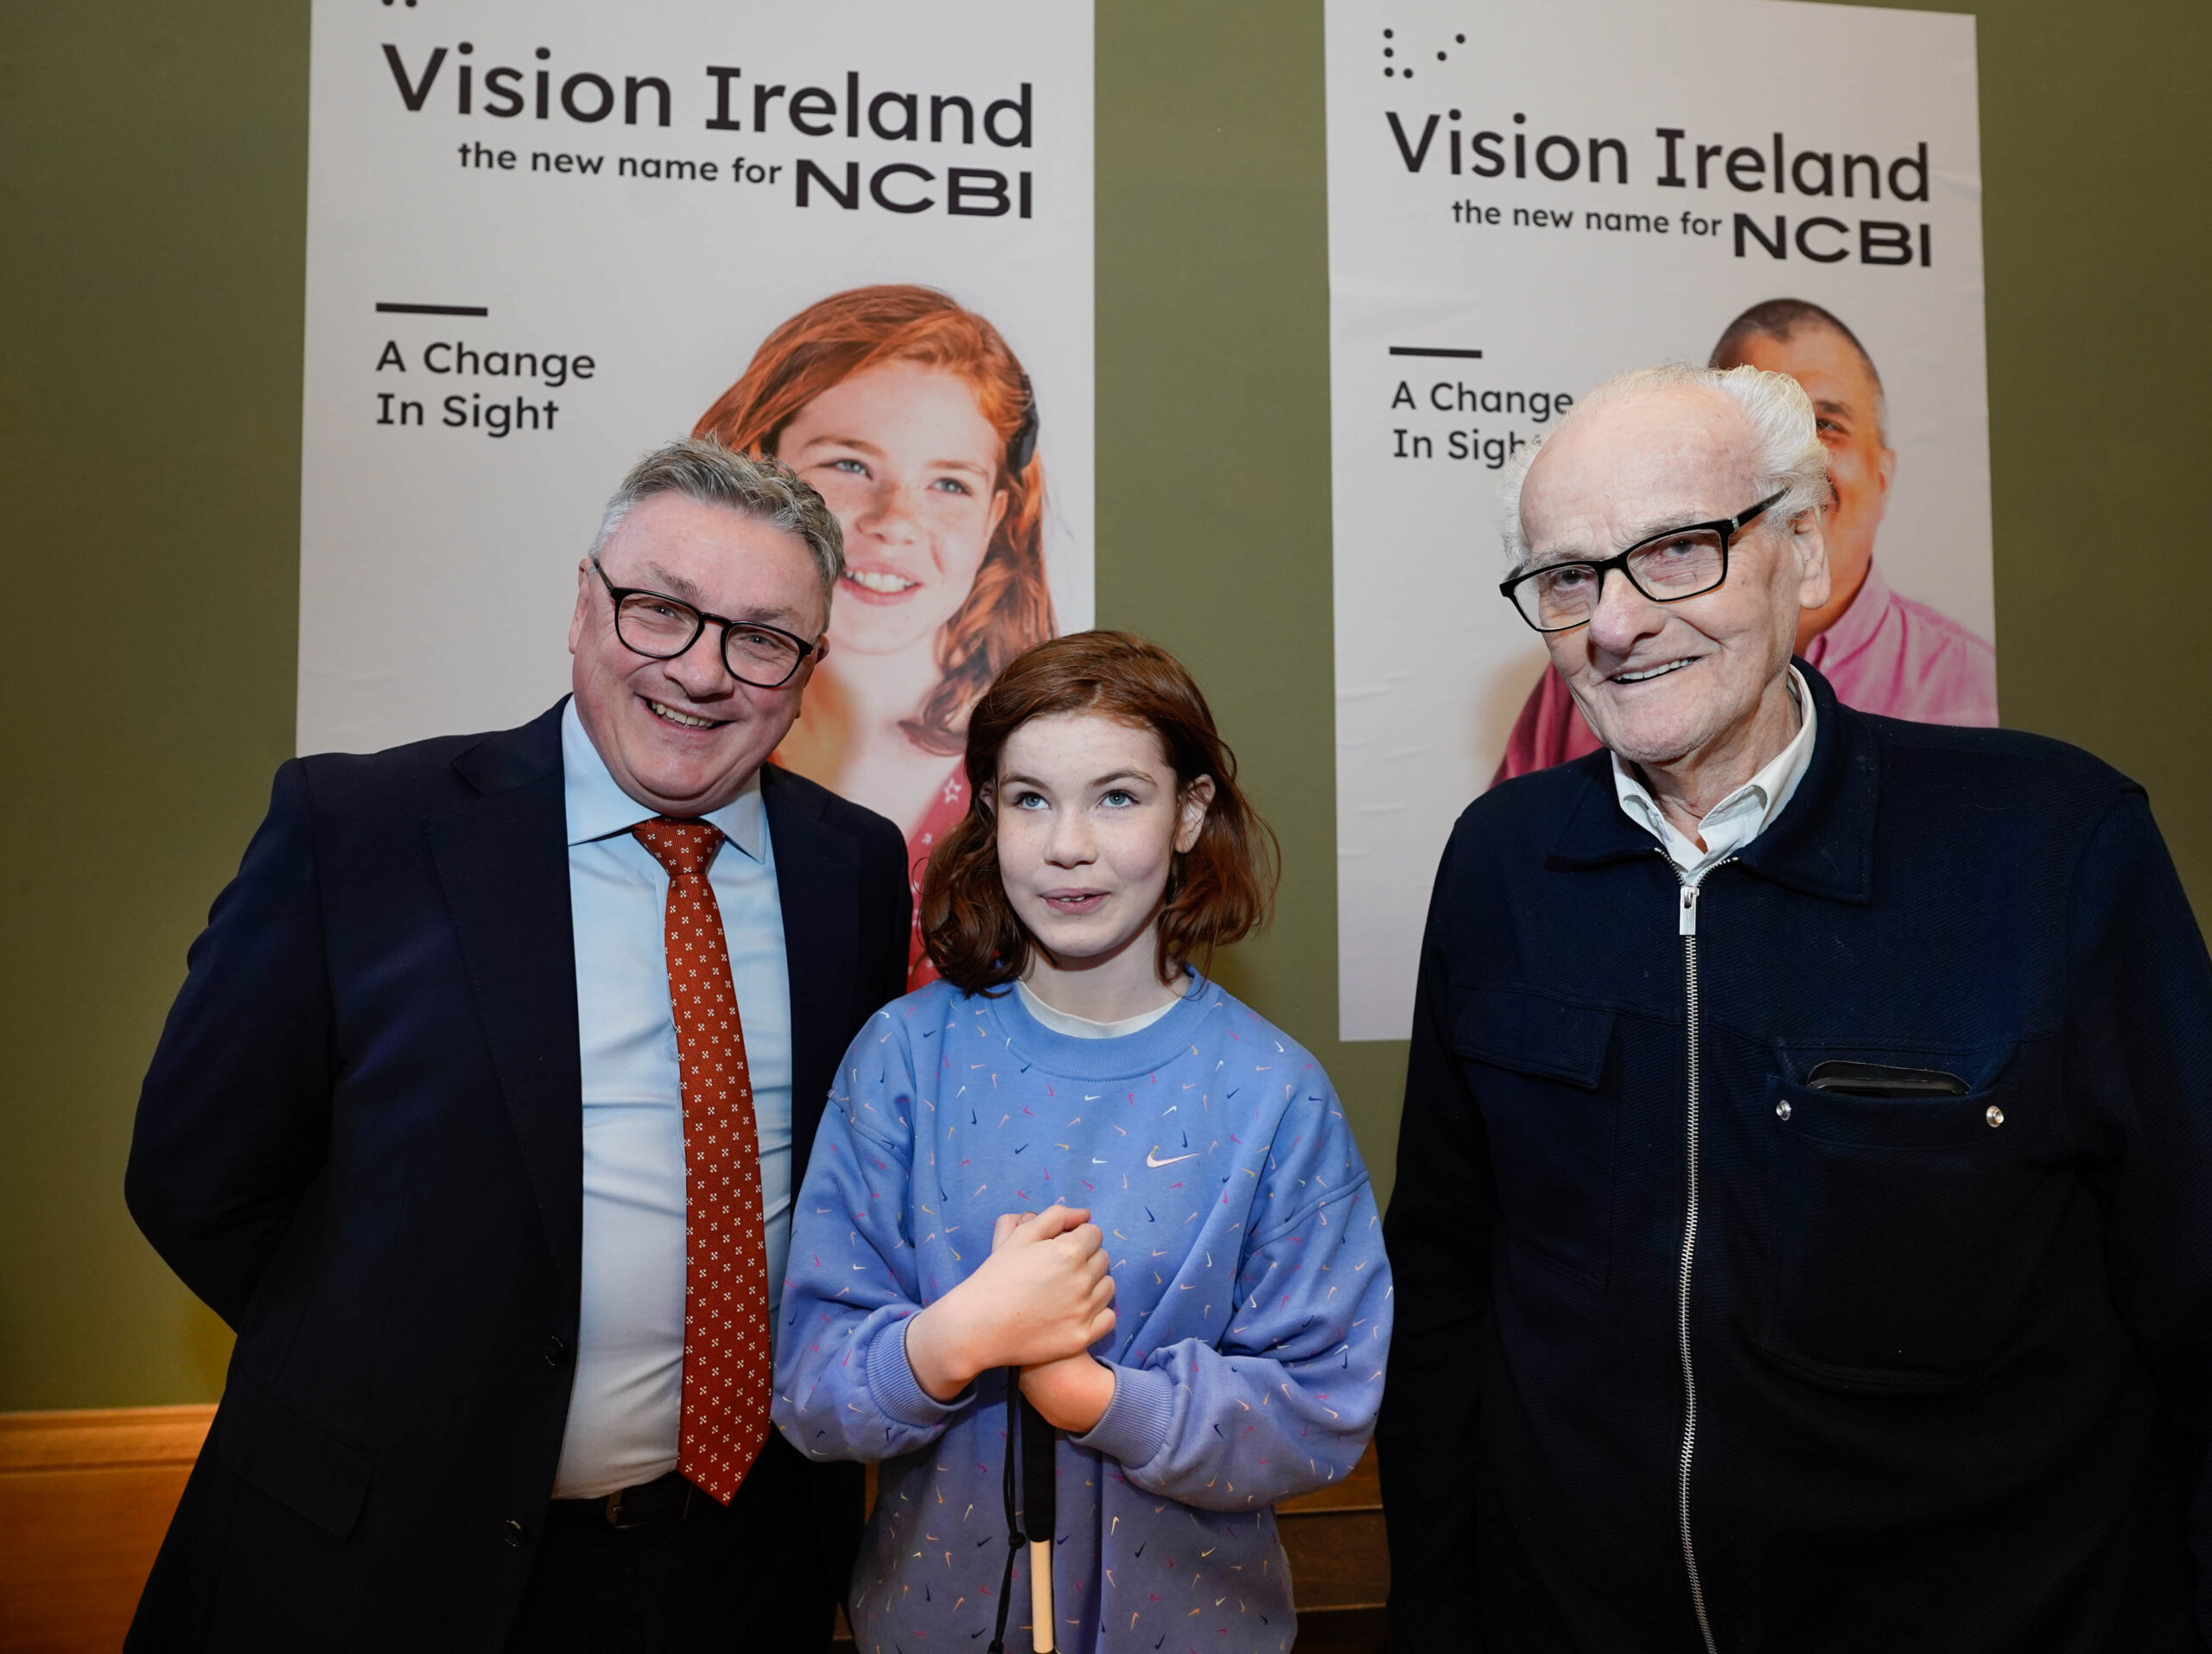 Chris White, CEO of Vision Ireland, is wearing a suit and standing next to Edith Toomey who is holding her white cane and is wearing a blue top, and Lar Keogh who is wearing glasses and a black coat. All three are standing in front of a Vision Ireland poster which features a picture of Edith.